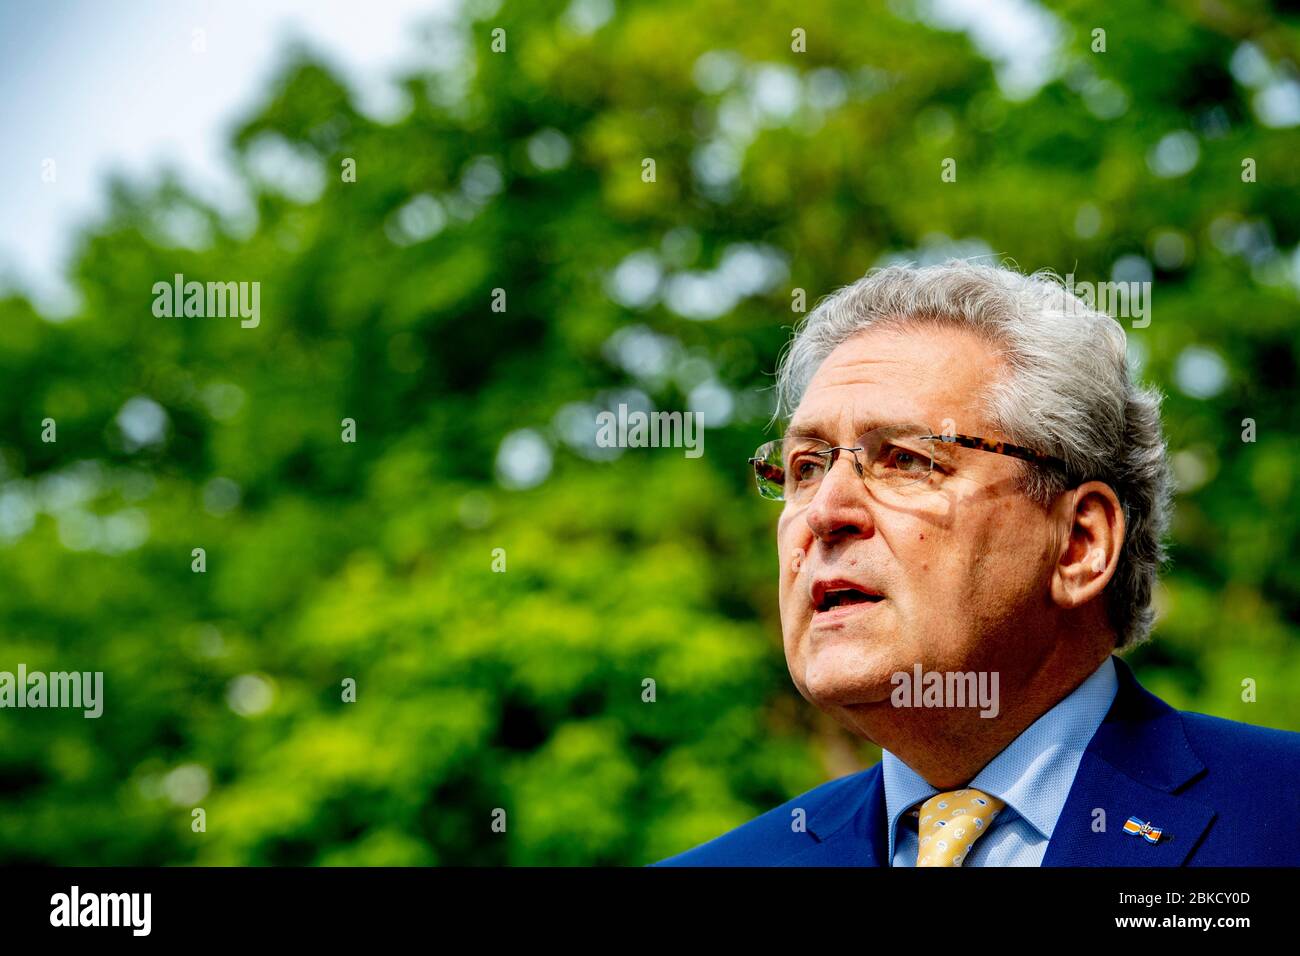 Politician Henk Krol leaves 50Plus and started a new movement; the party for the future. The Party leader departed from 50Plus and started a new movement with Femke Merel van Kooten the Party for the Future. Stock Photo